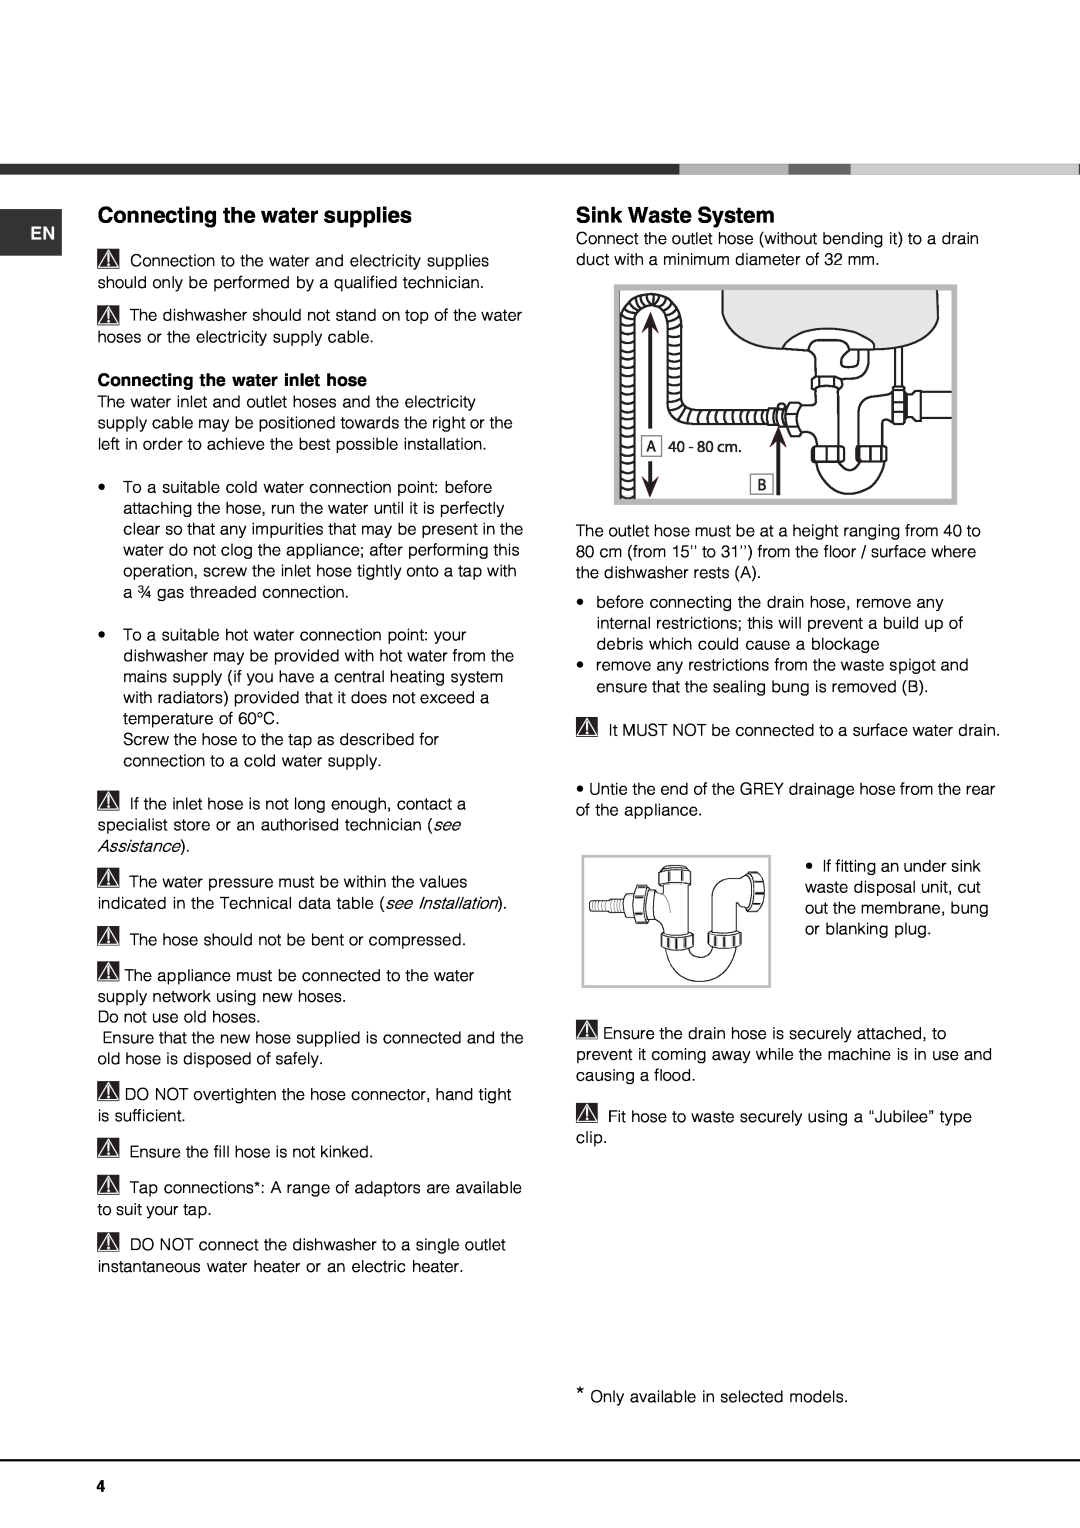 Hotpoint FDPF 481 manual Connecting the water supplies, Sink Waste System, Connecting the water inlet hose 